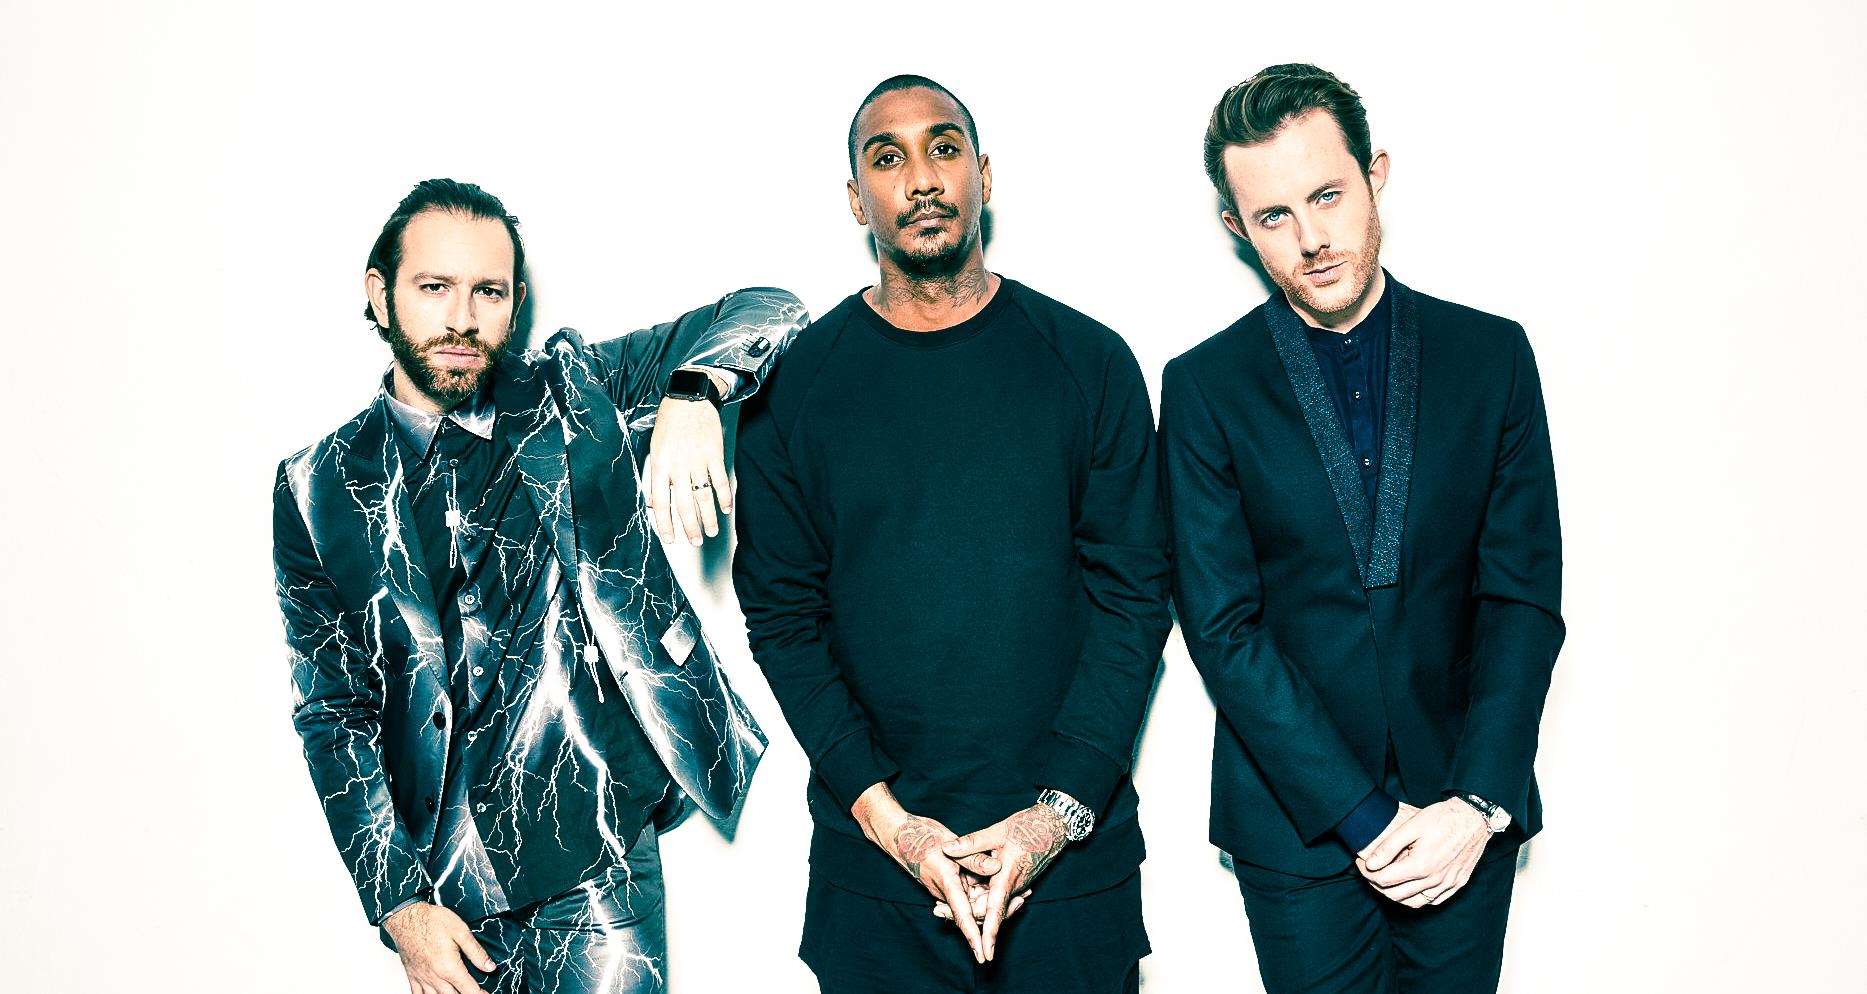 Chase and Status will play a sold-out set at Dreamland